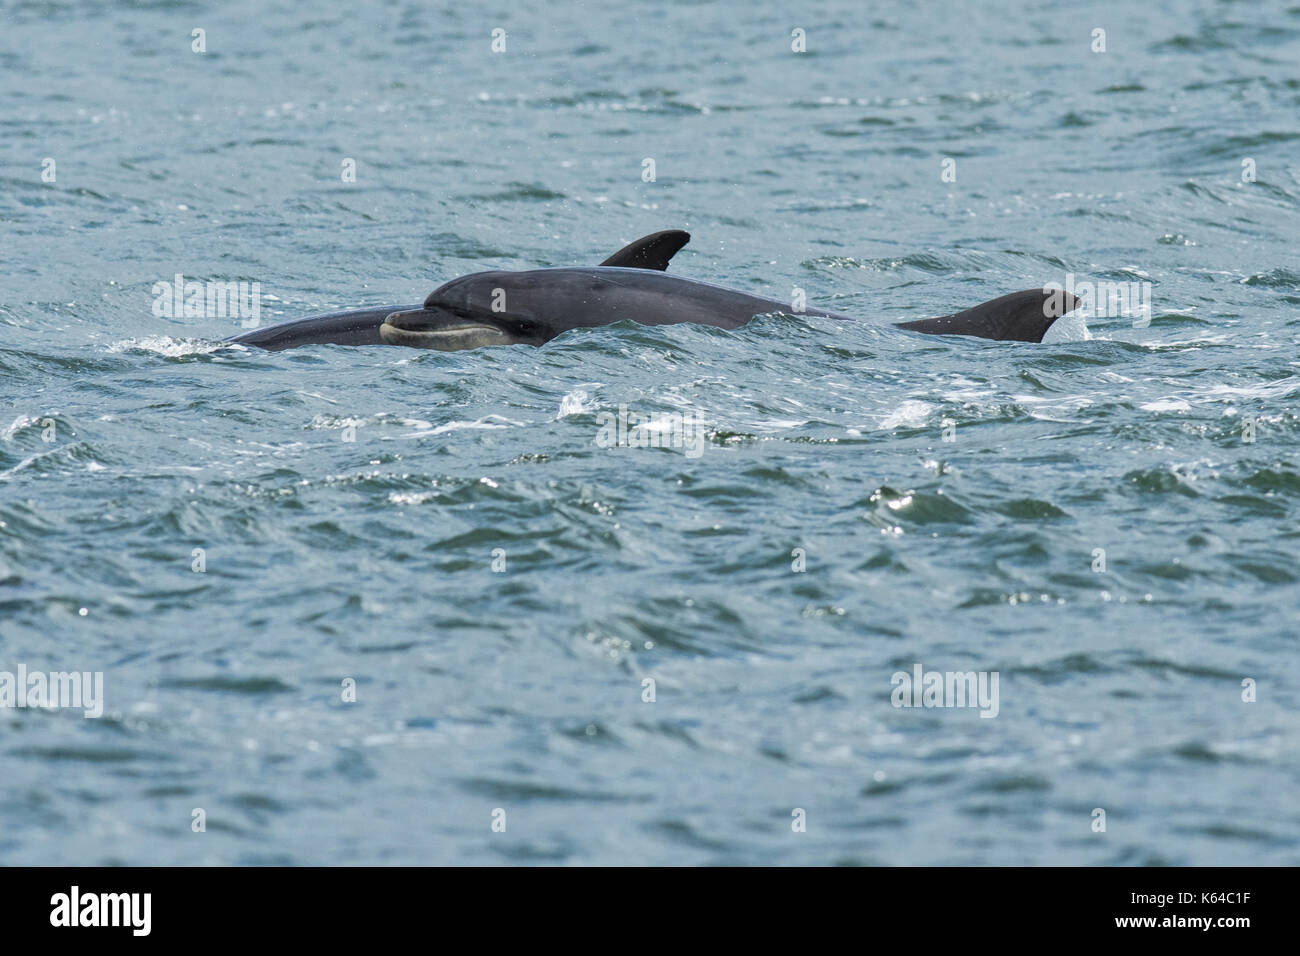 Bottlenose dolphins (Tursiops truncatus) in Bay, Chanonry Point, Moray Firth, Inverness, Scotland Stock Photo